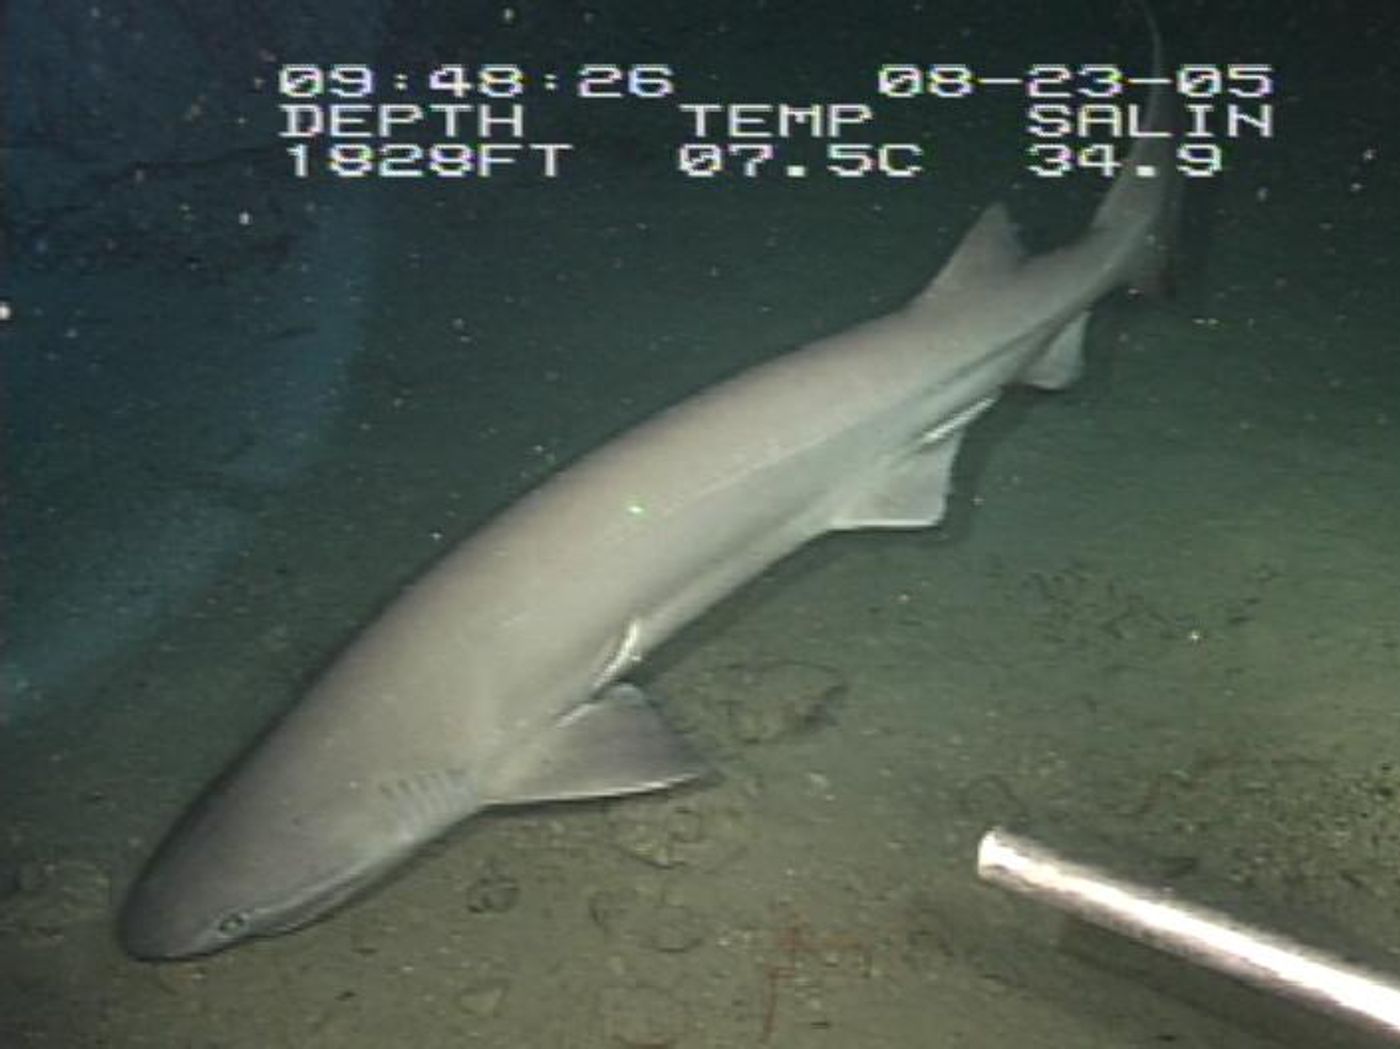 A sixgill shark pictured in the Gulf of Mexico.